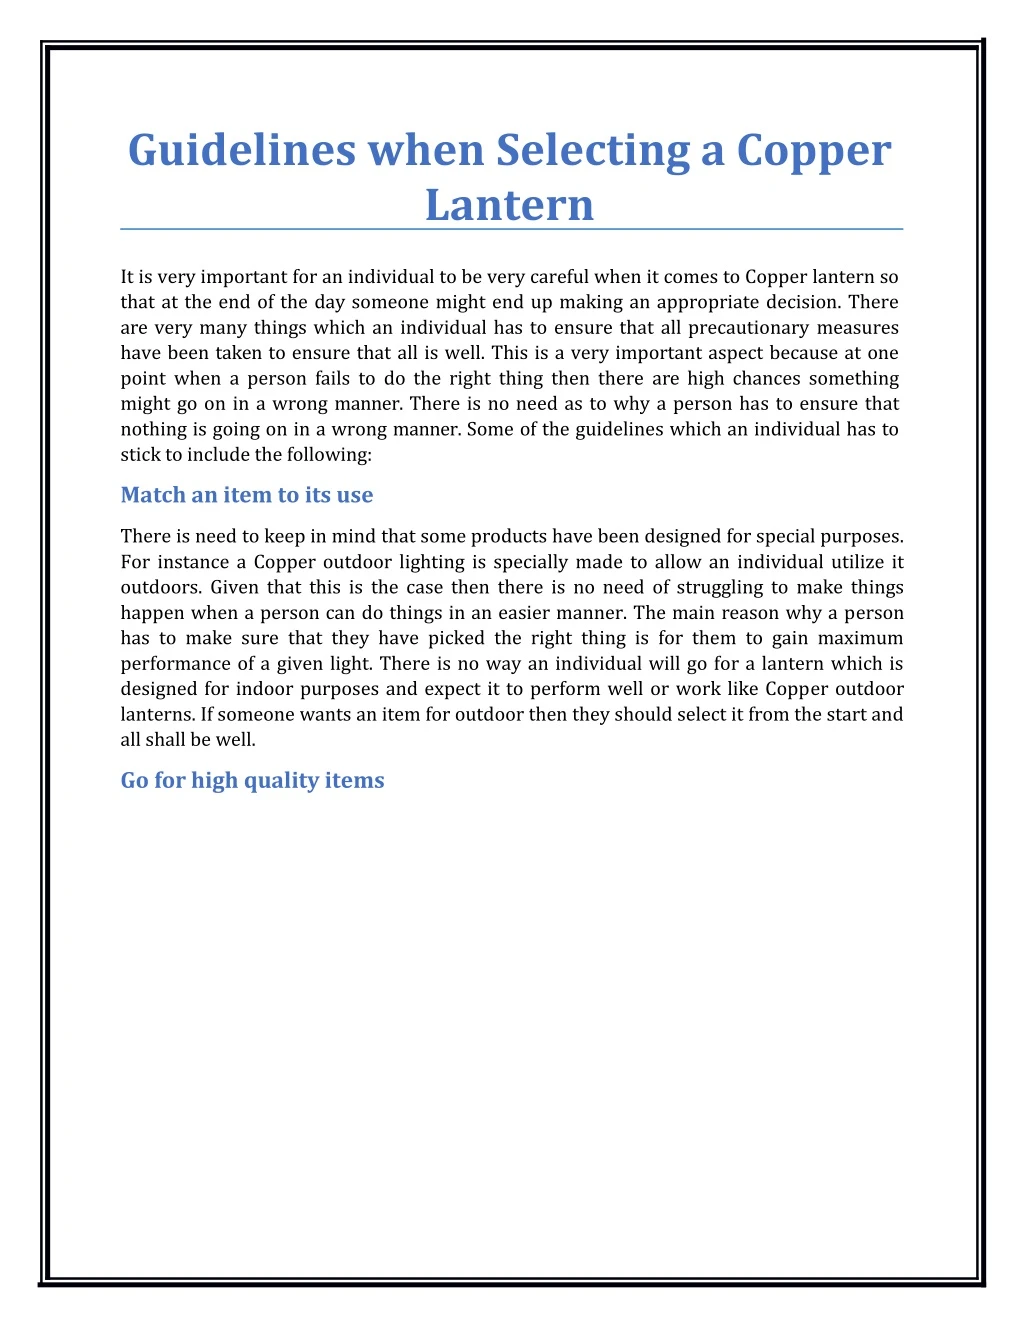 guidelines when selecting a copper lantern